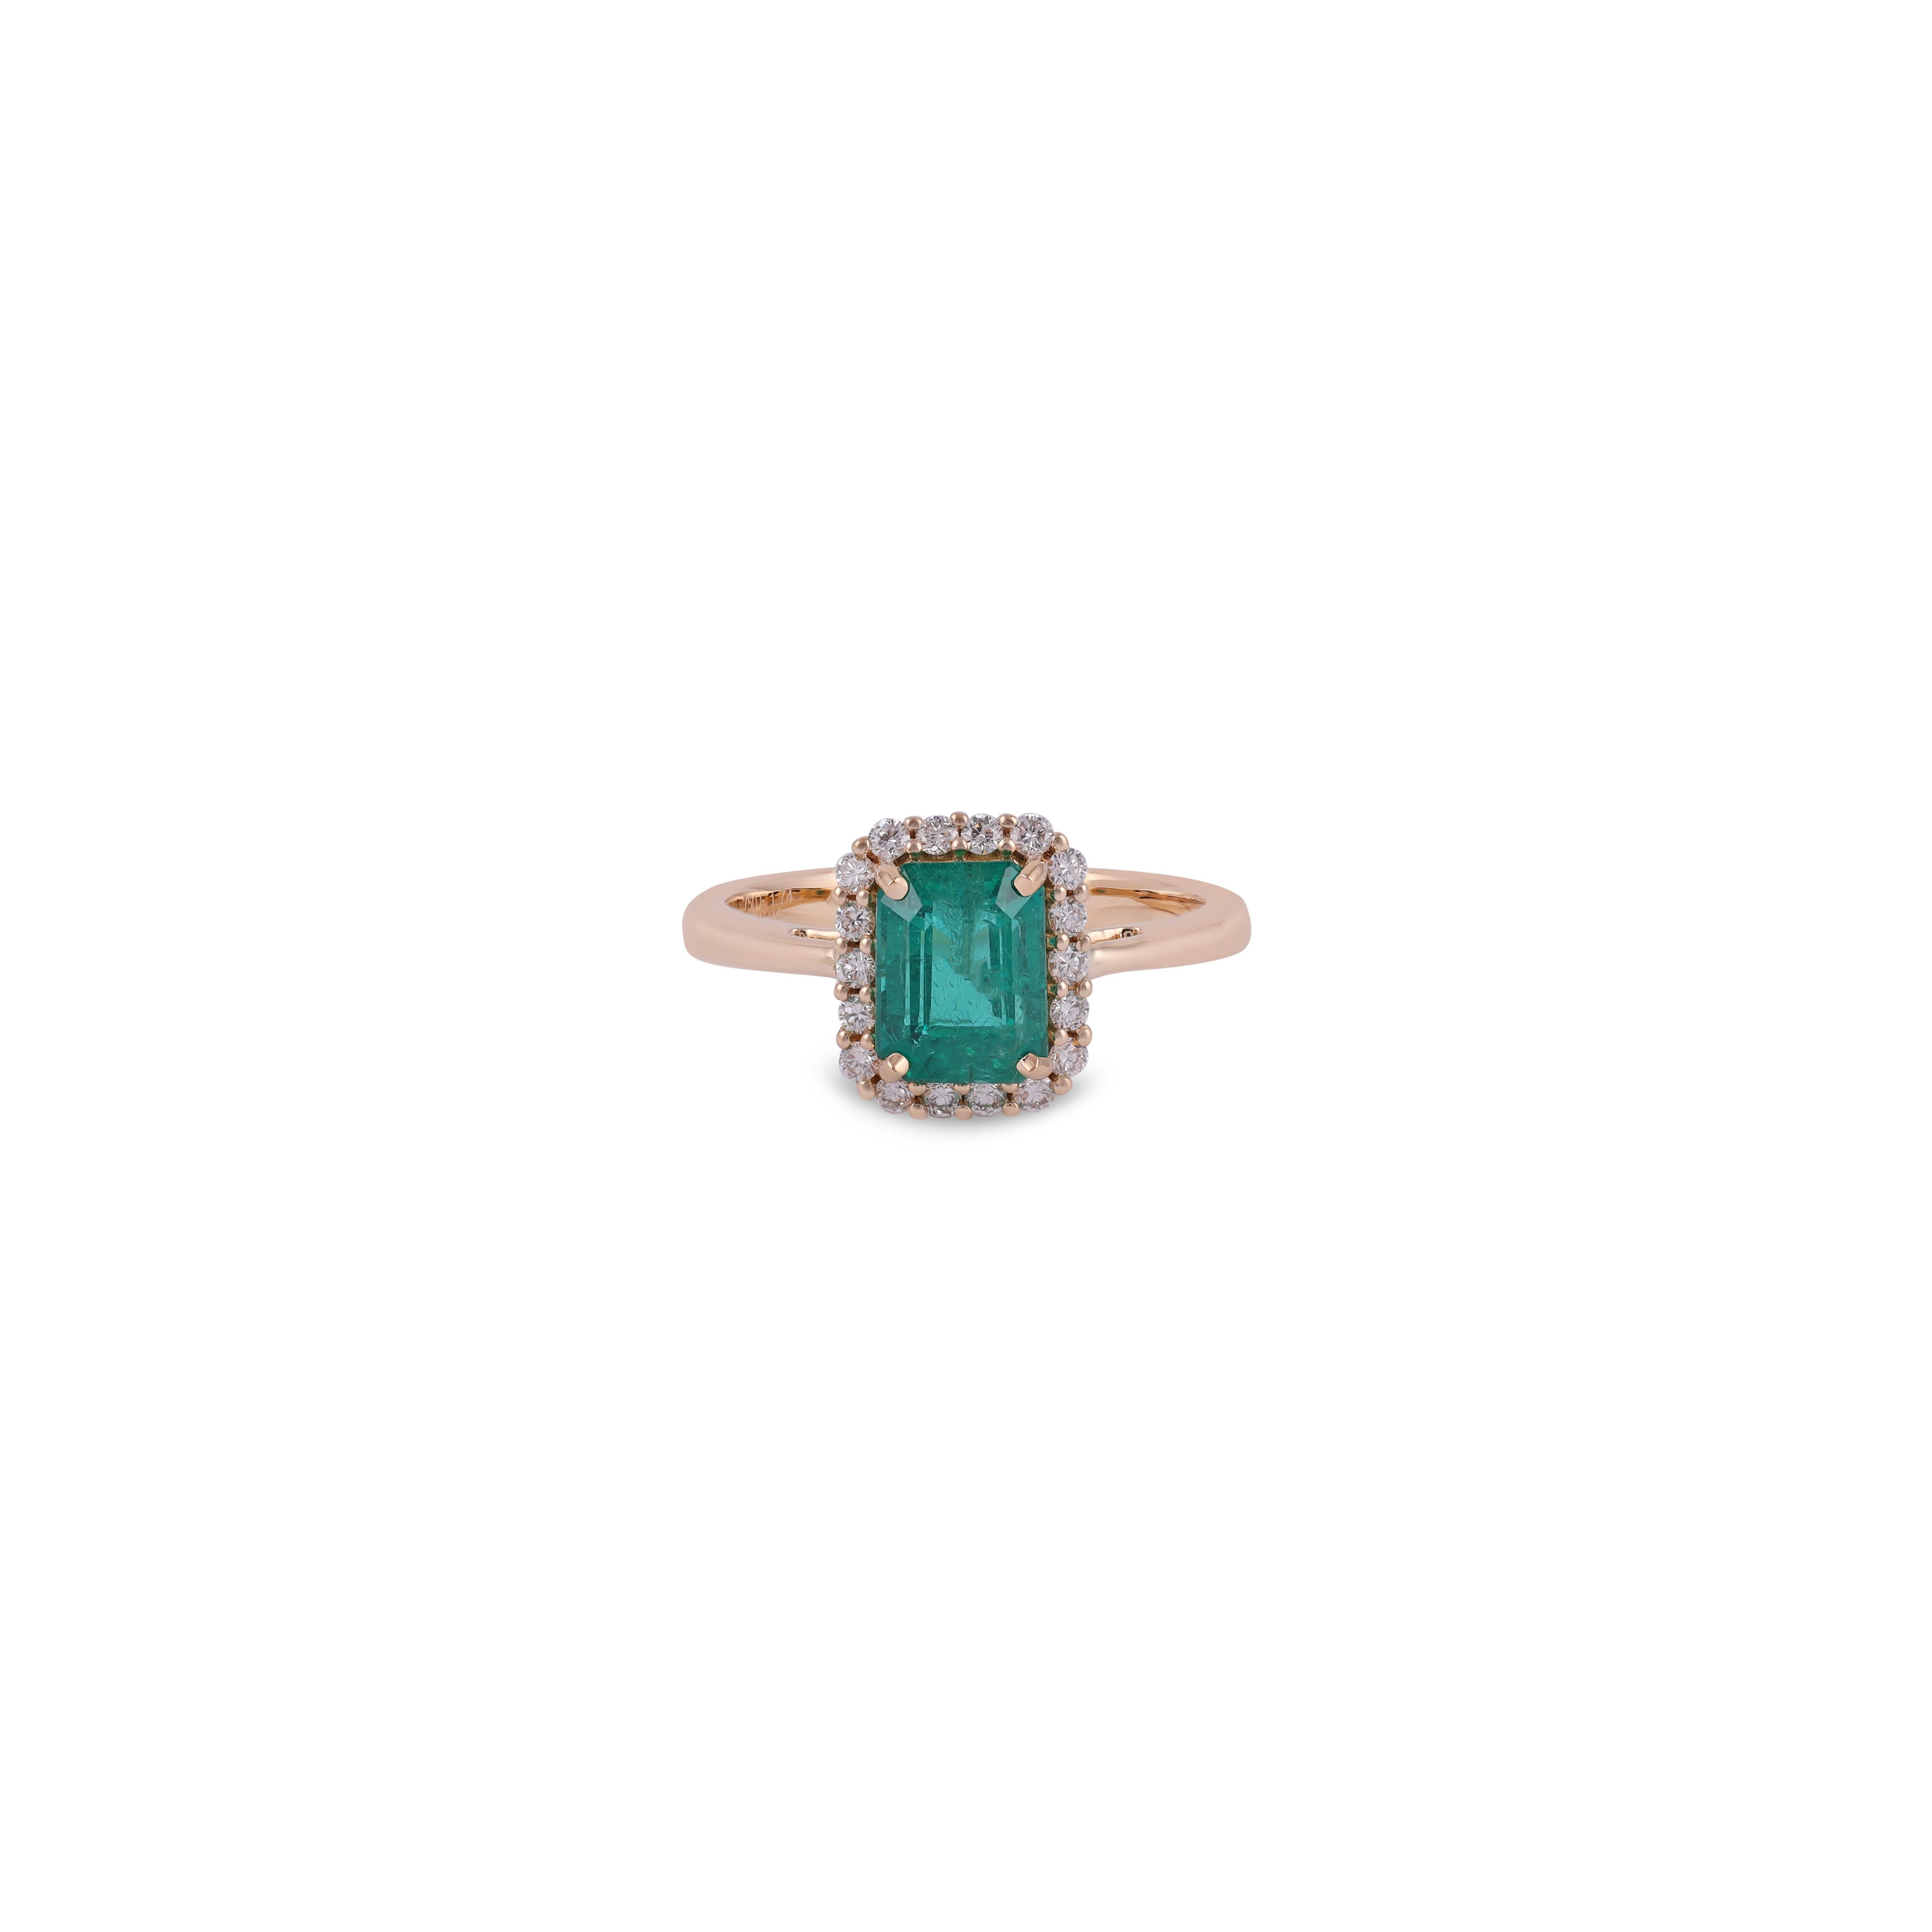 This is an elegant emerald & diamond ring studded in 18k Yellow gold with 1 piece of  Zambian emerald weight 1.74 carat which is surrounded by 18 pieces of round shaped diamonds weight 0.24 carat, this entire ring studded in 18k Yellow gold weight